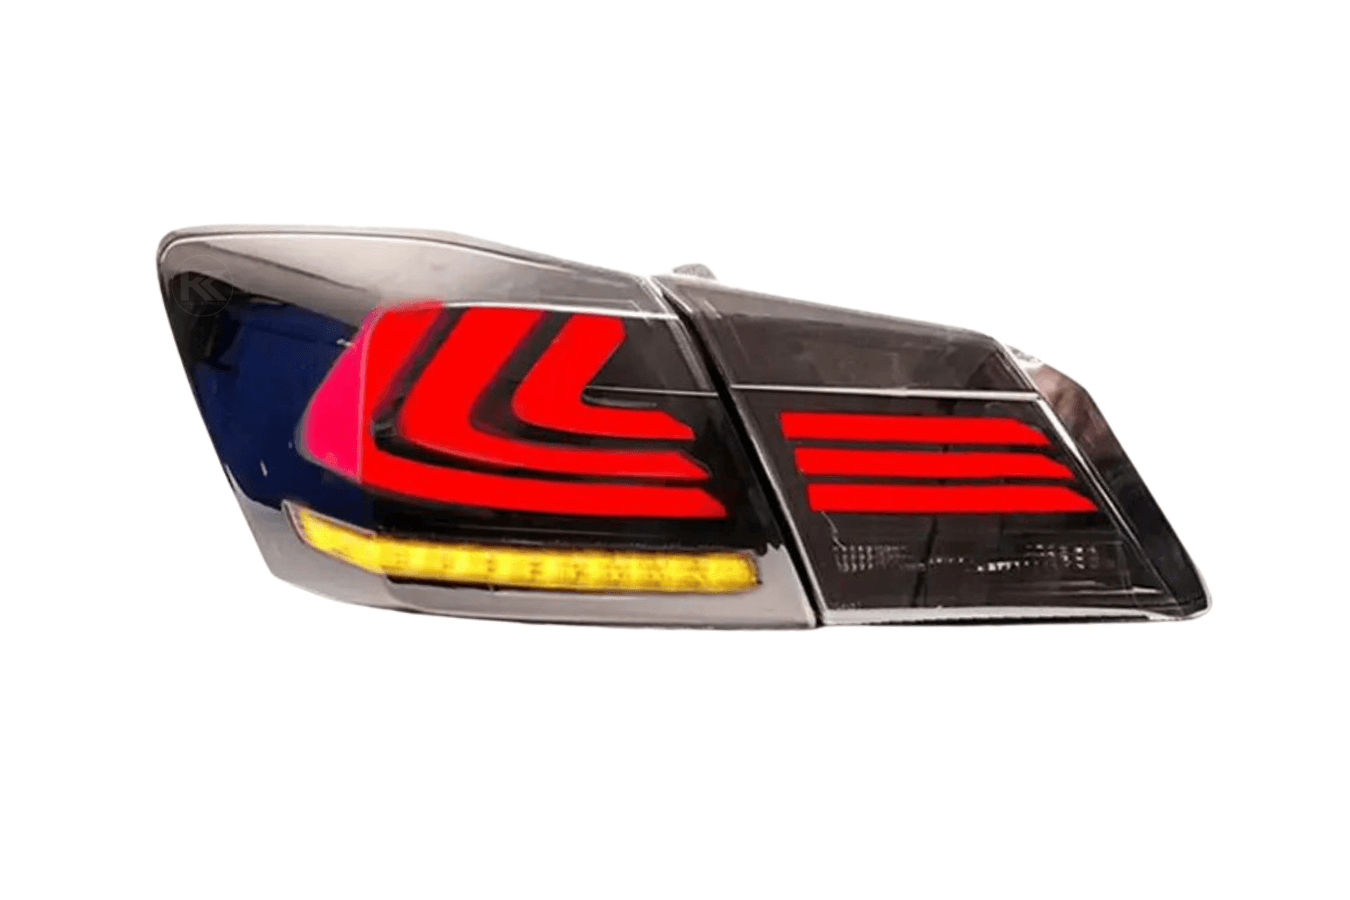 Honda Accord 9th Gen -Red,Red Smoked, Full Smoke- LED Tail Lights Upgrade (2013-2017) - K2 Industries